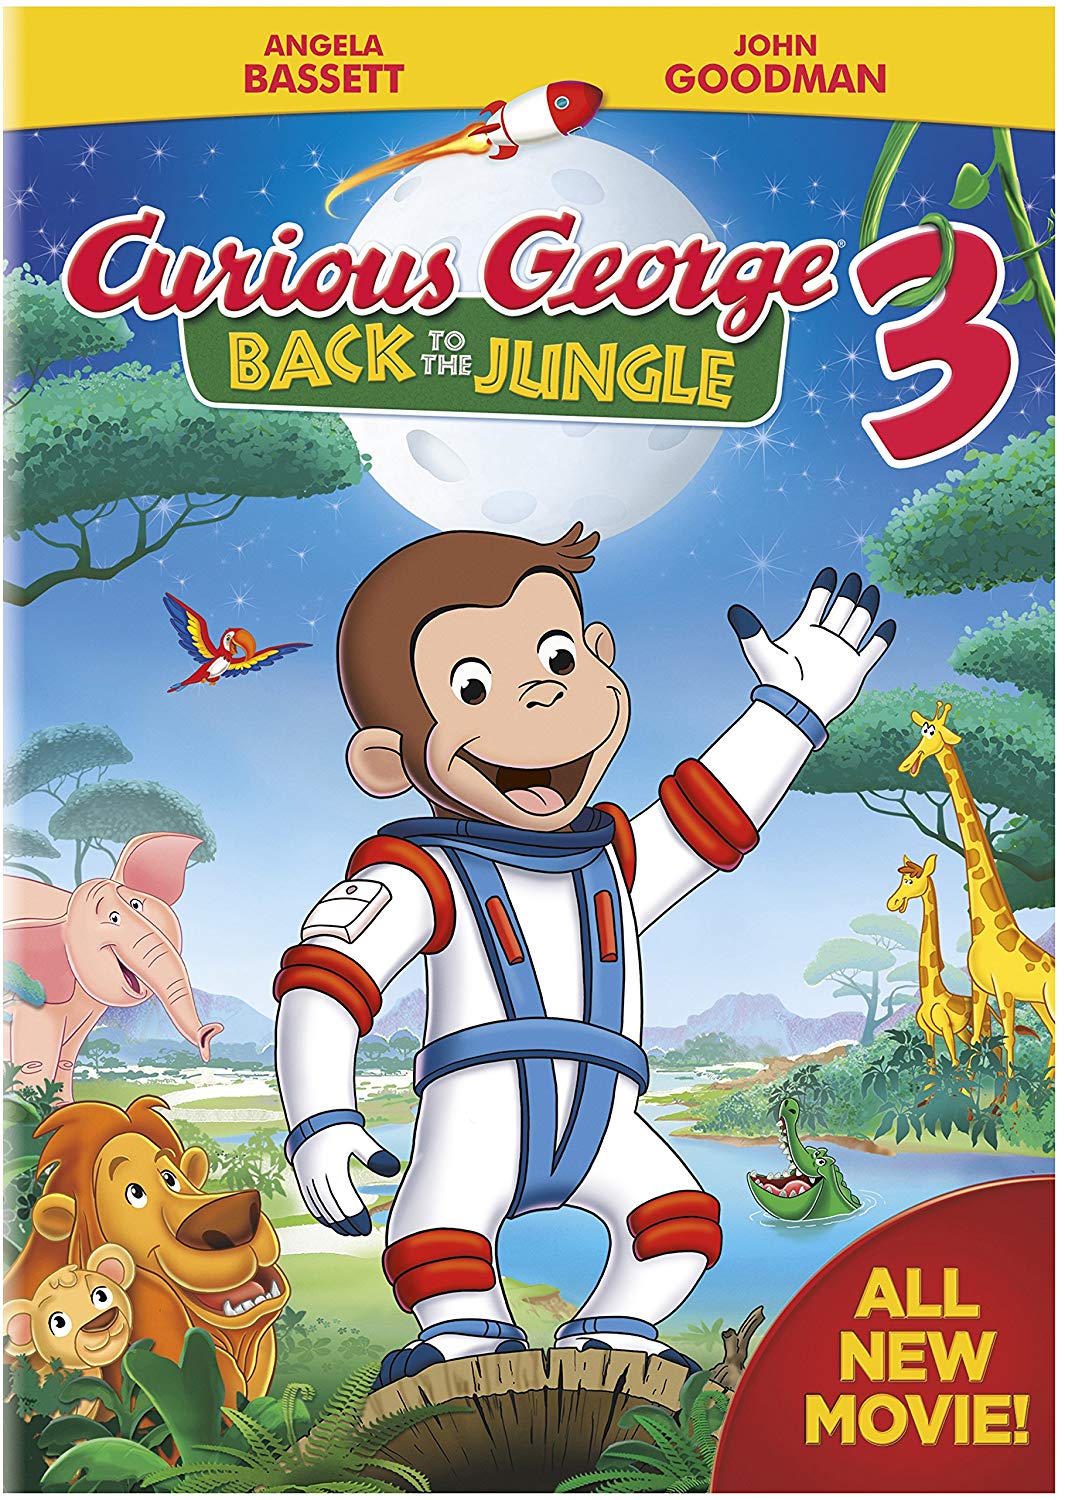 curious george episodes 2015